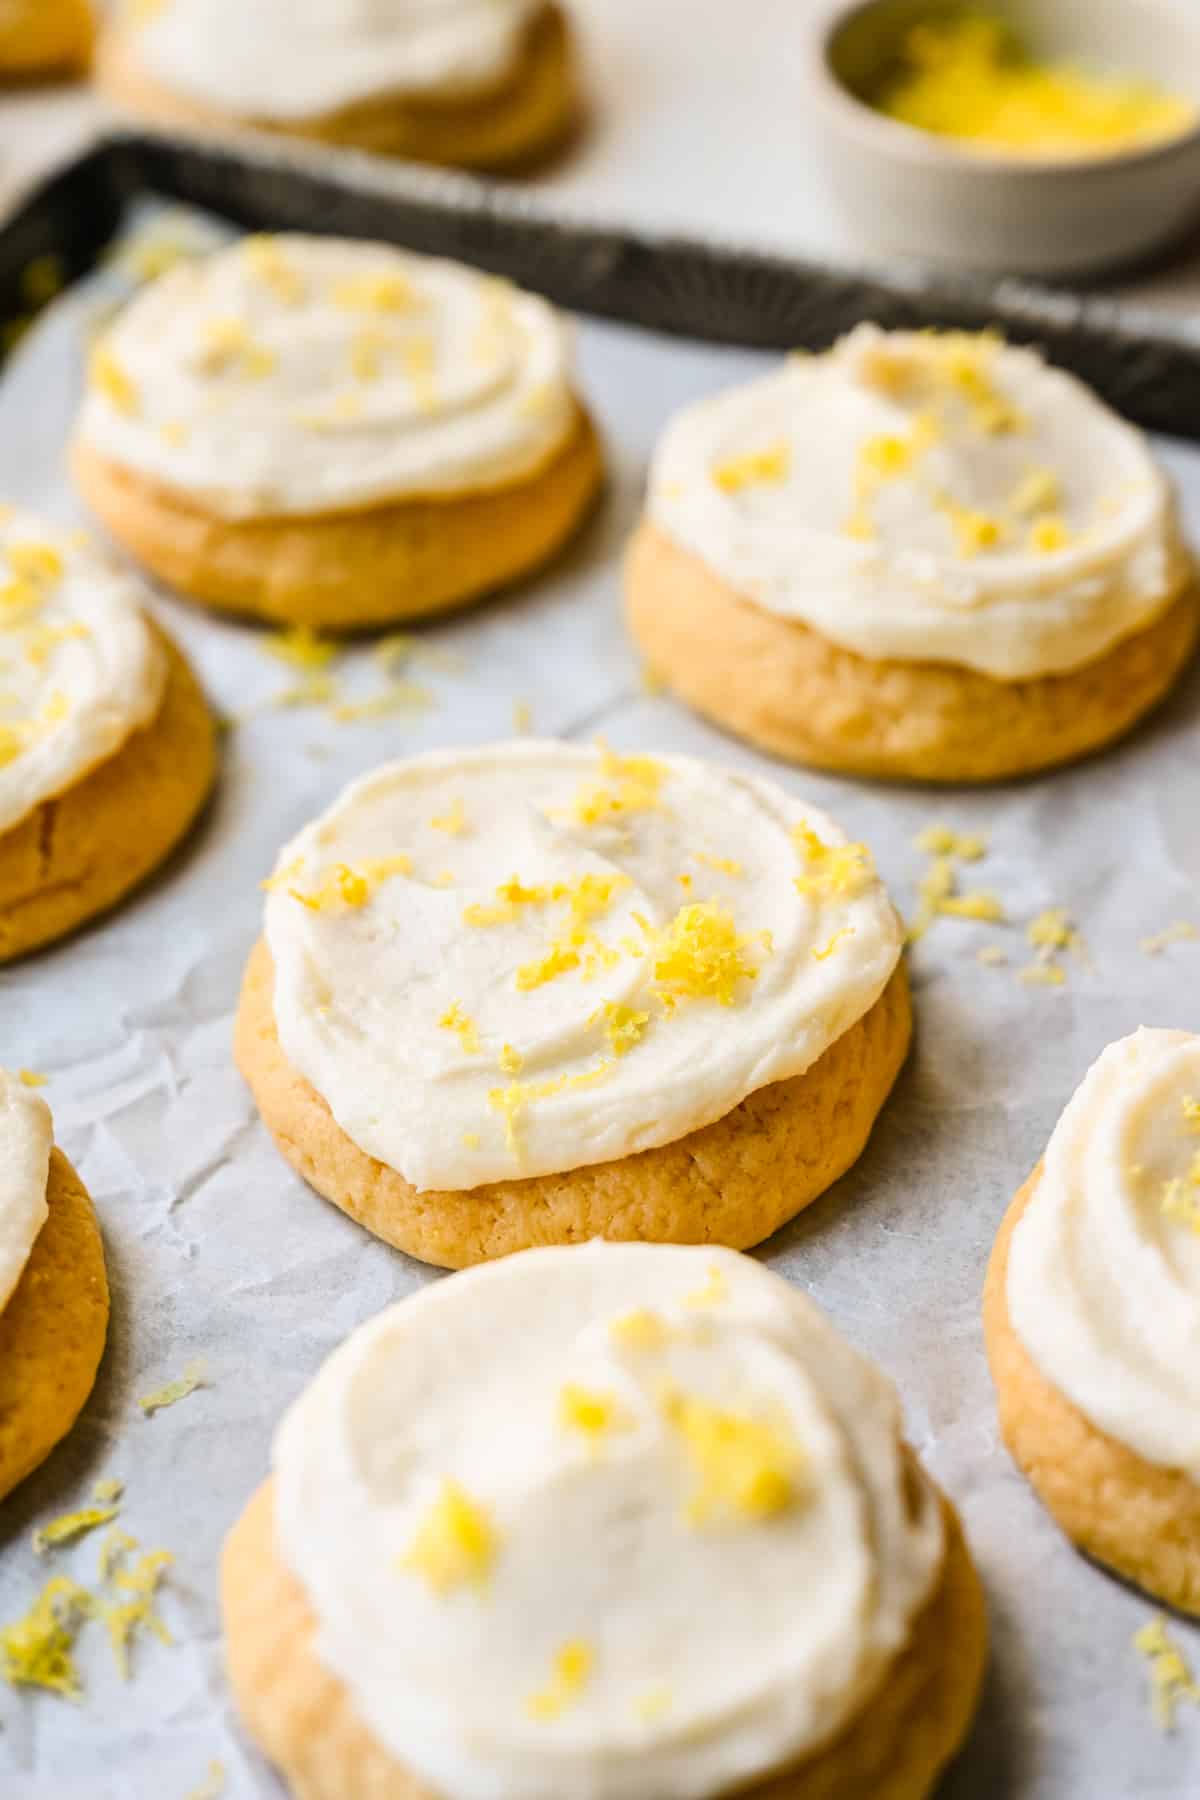 Frosted lemon sugar cookies topped with fresh grated lemon zest.